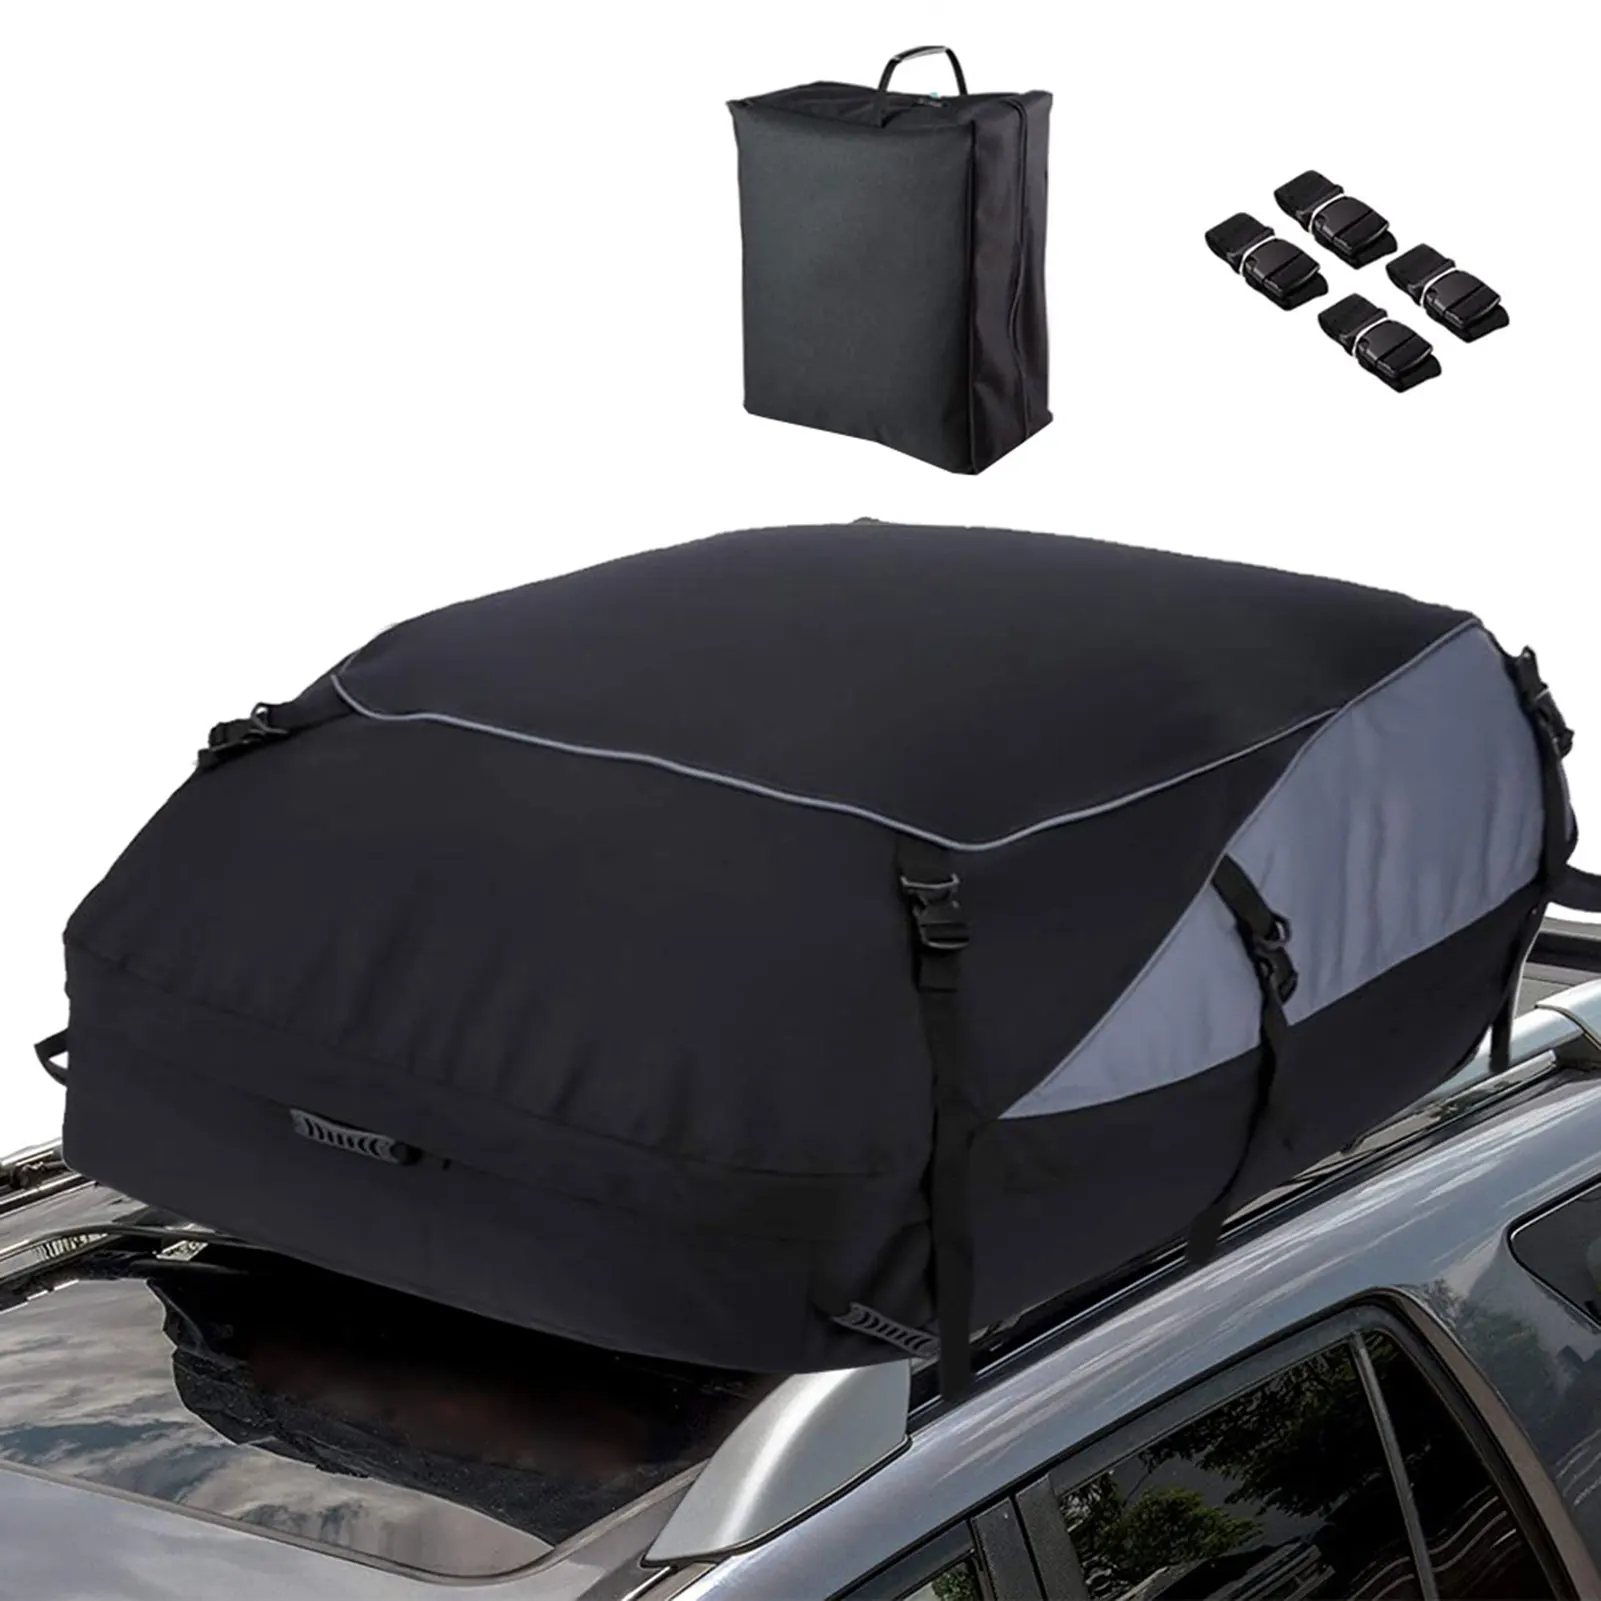 Roof Box for All Cars with Rack or Rails Needed Three sizes of Waterproof Roof Bag 600D Three capacities 380L/560L/790L,Foldable Rooftop Cargo Bag with 6 Reinforced Straps 130x100x45CM 